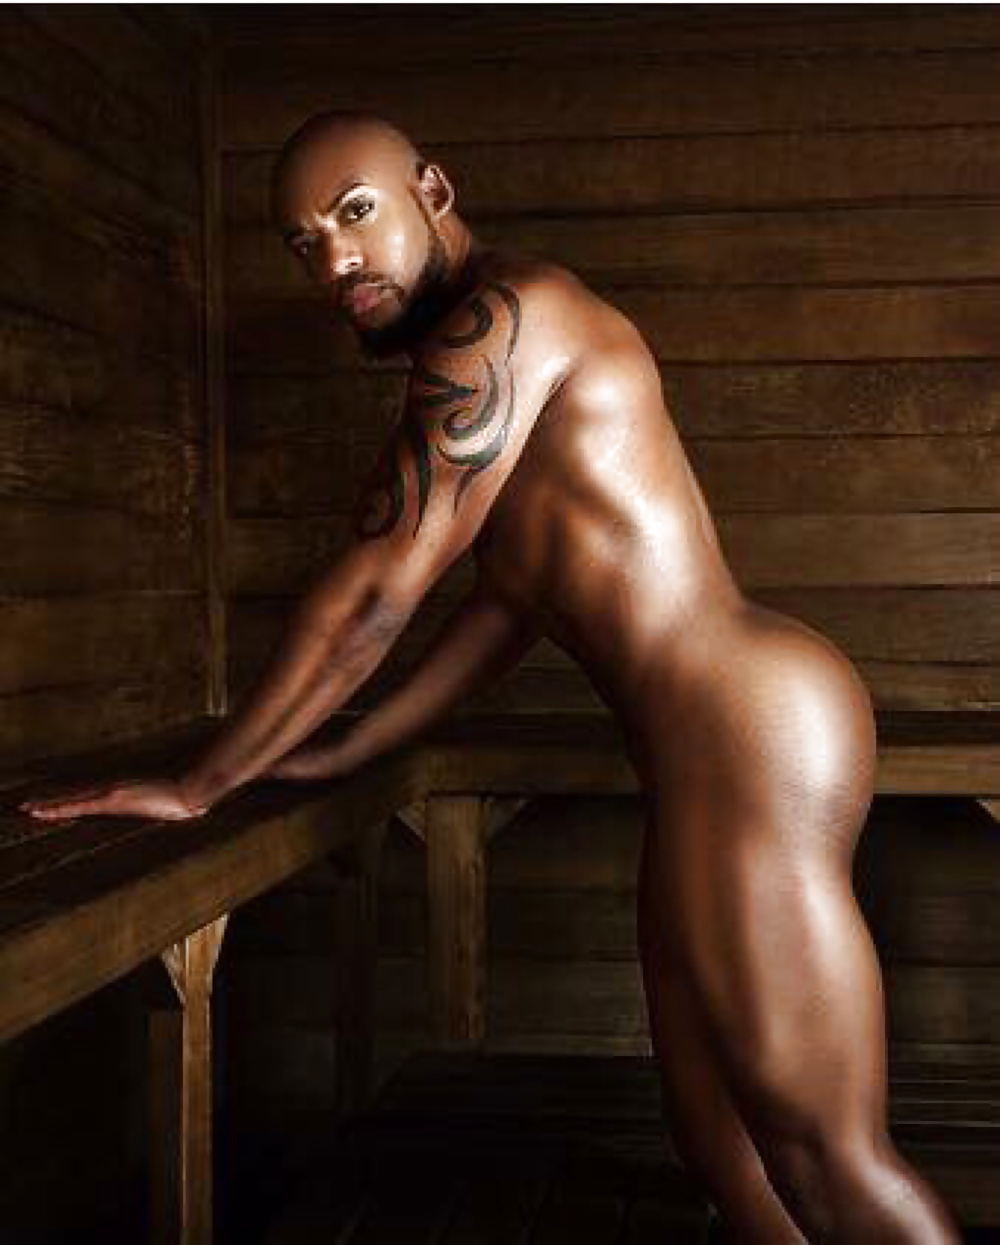 Galleries and pictures of hot naked black men, big black coks and interraci...